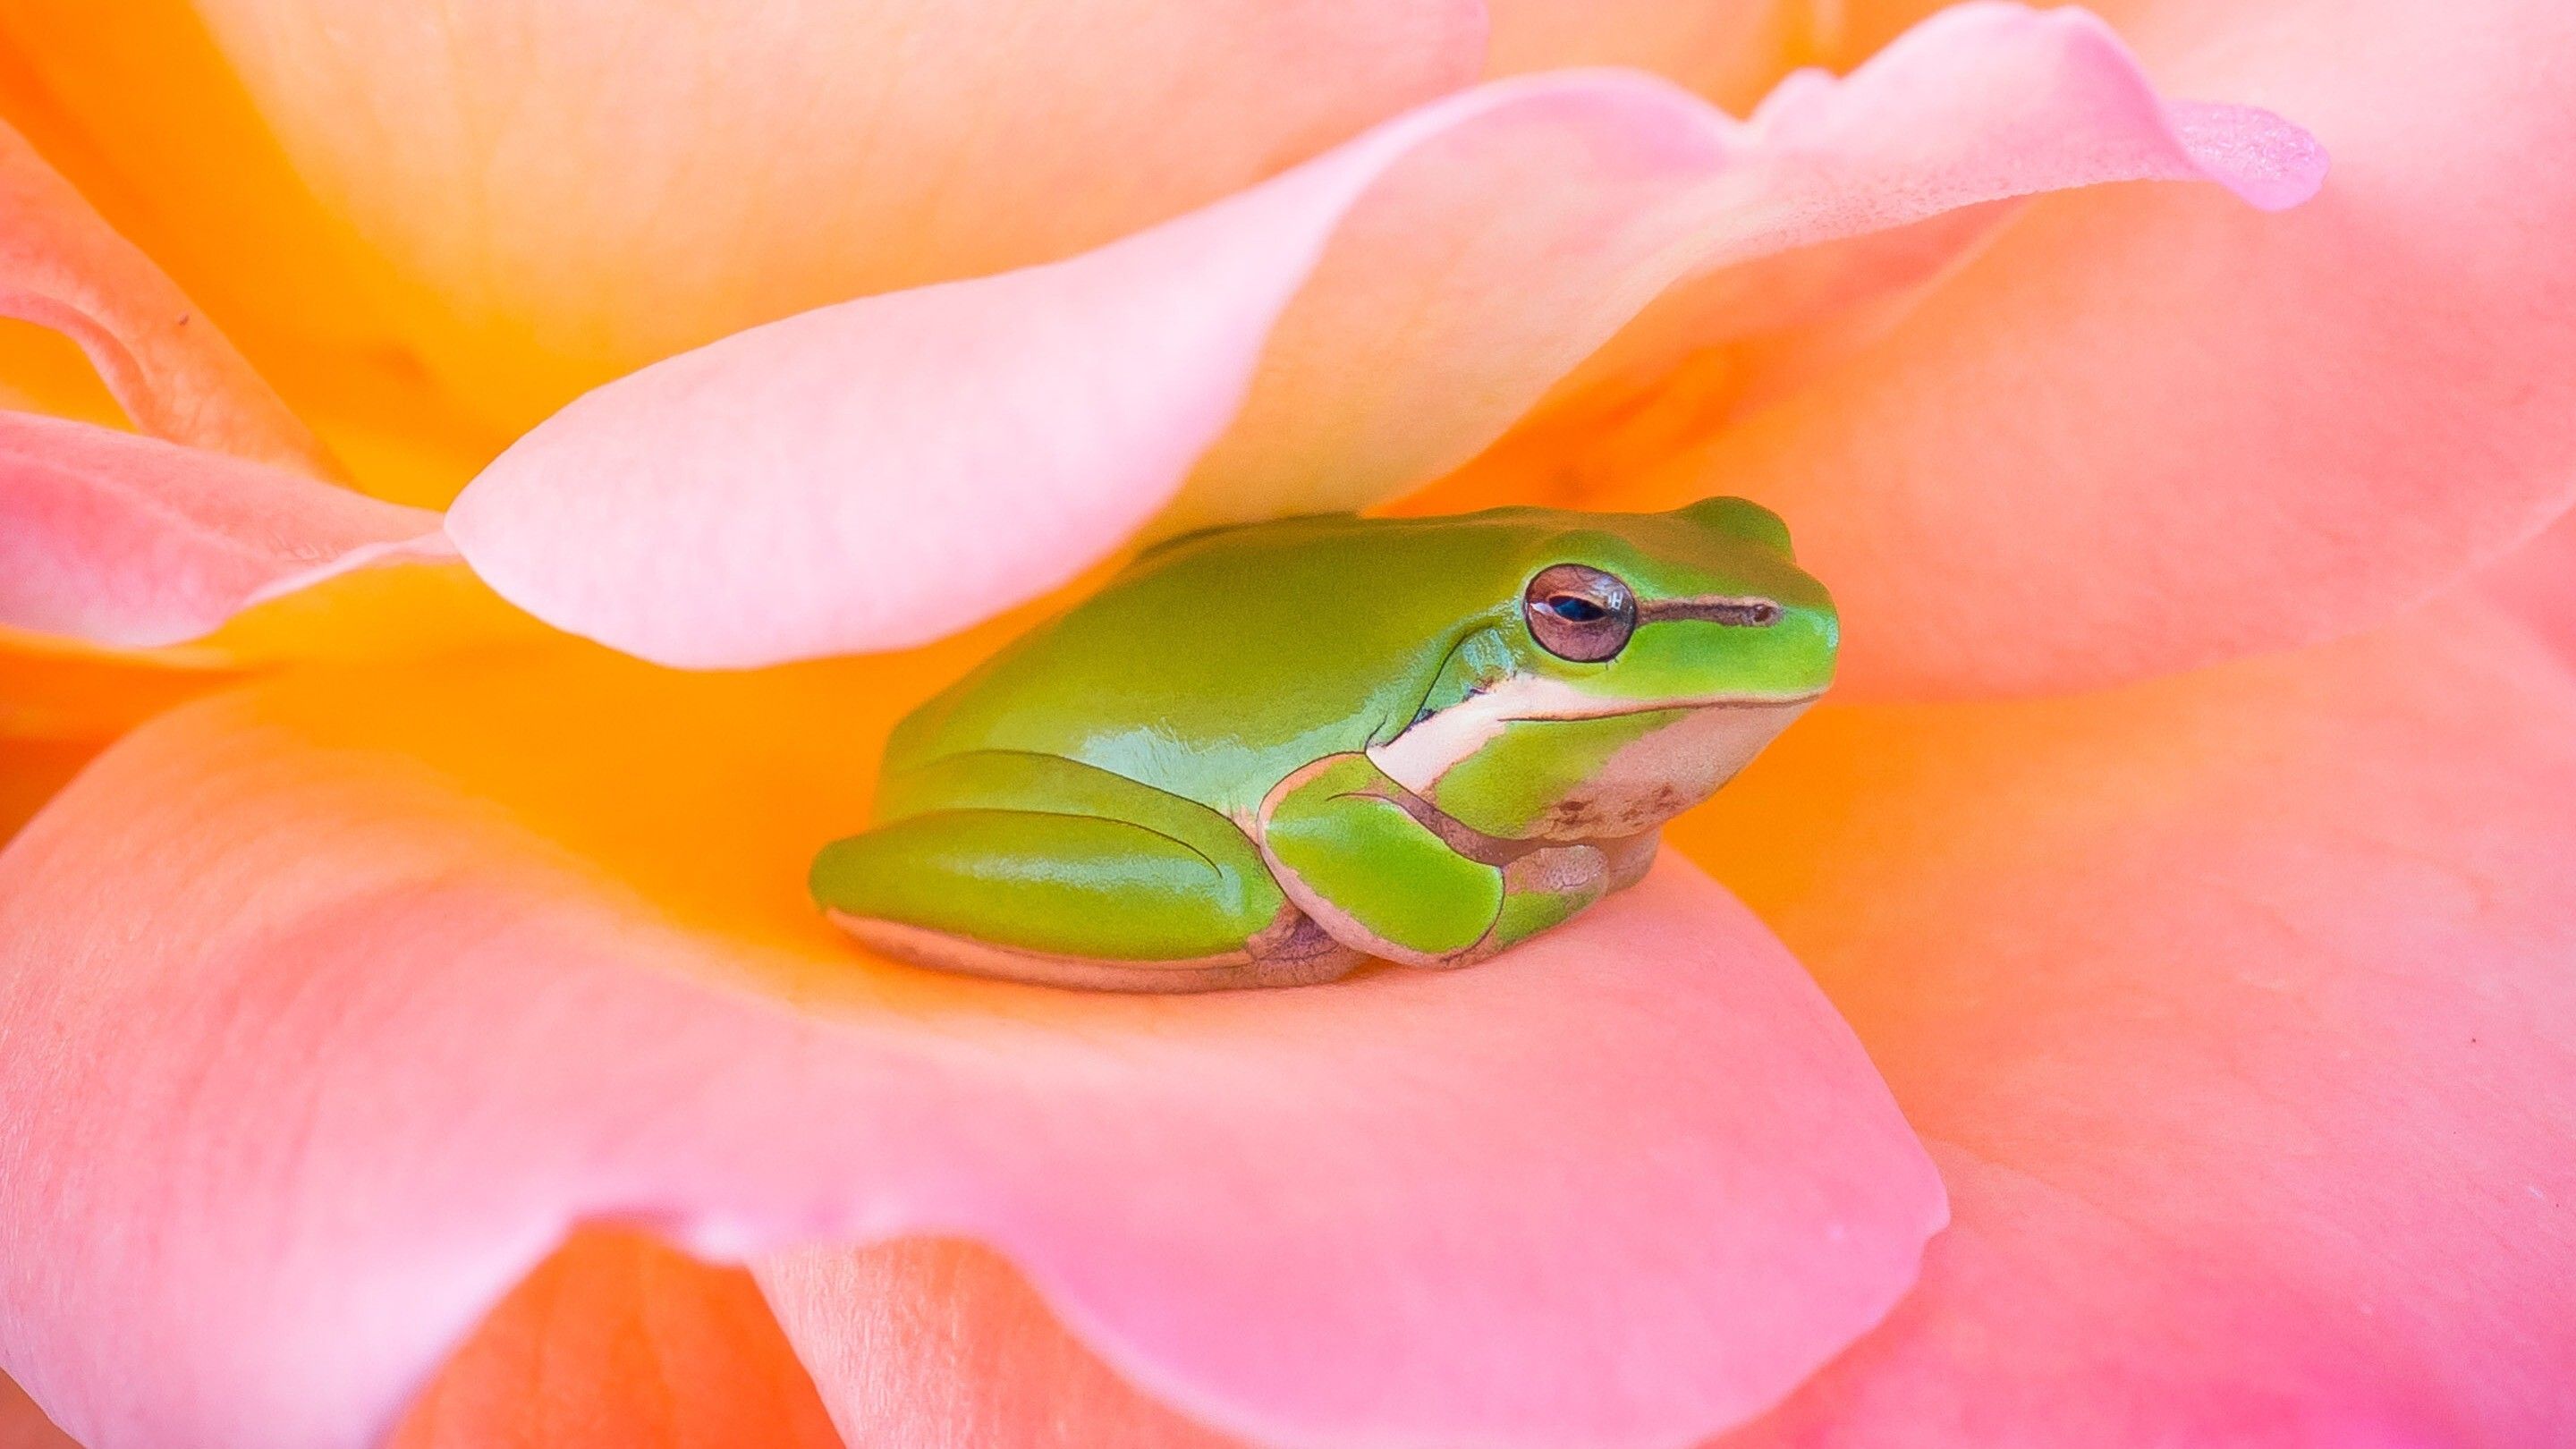 A green frog sitting on a pink rose. - Frog